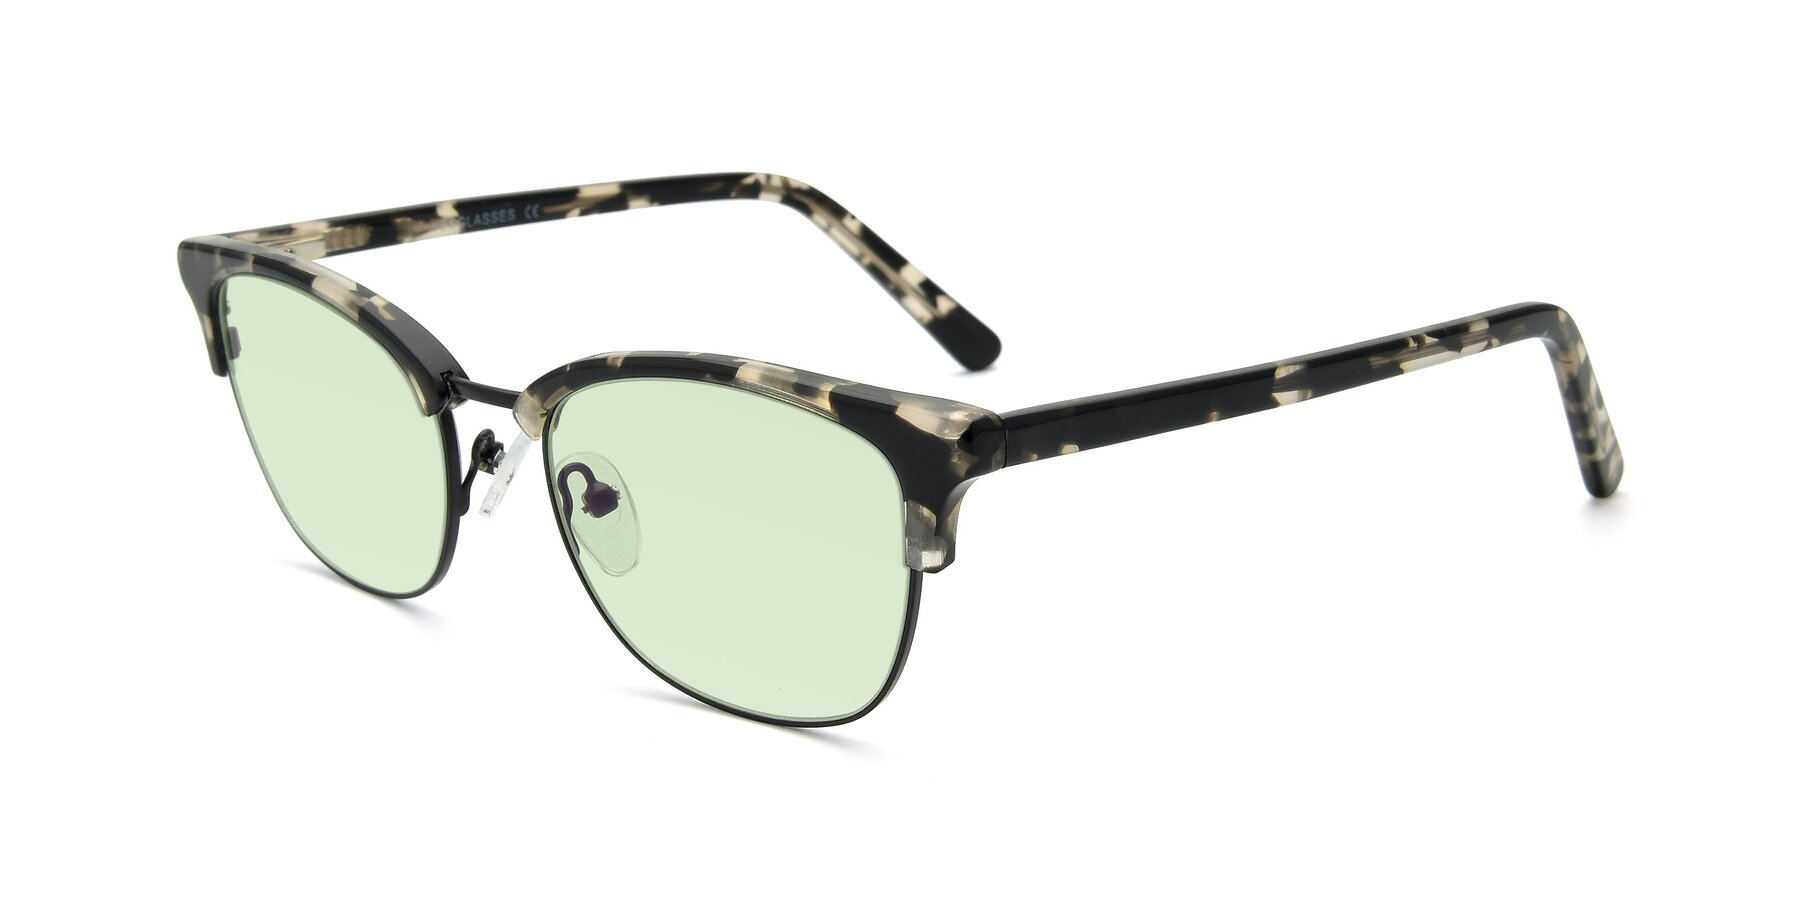 Angle of 17463 in Black-Tortoise with Light Green Tinted Lenses